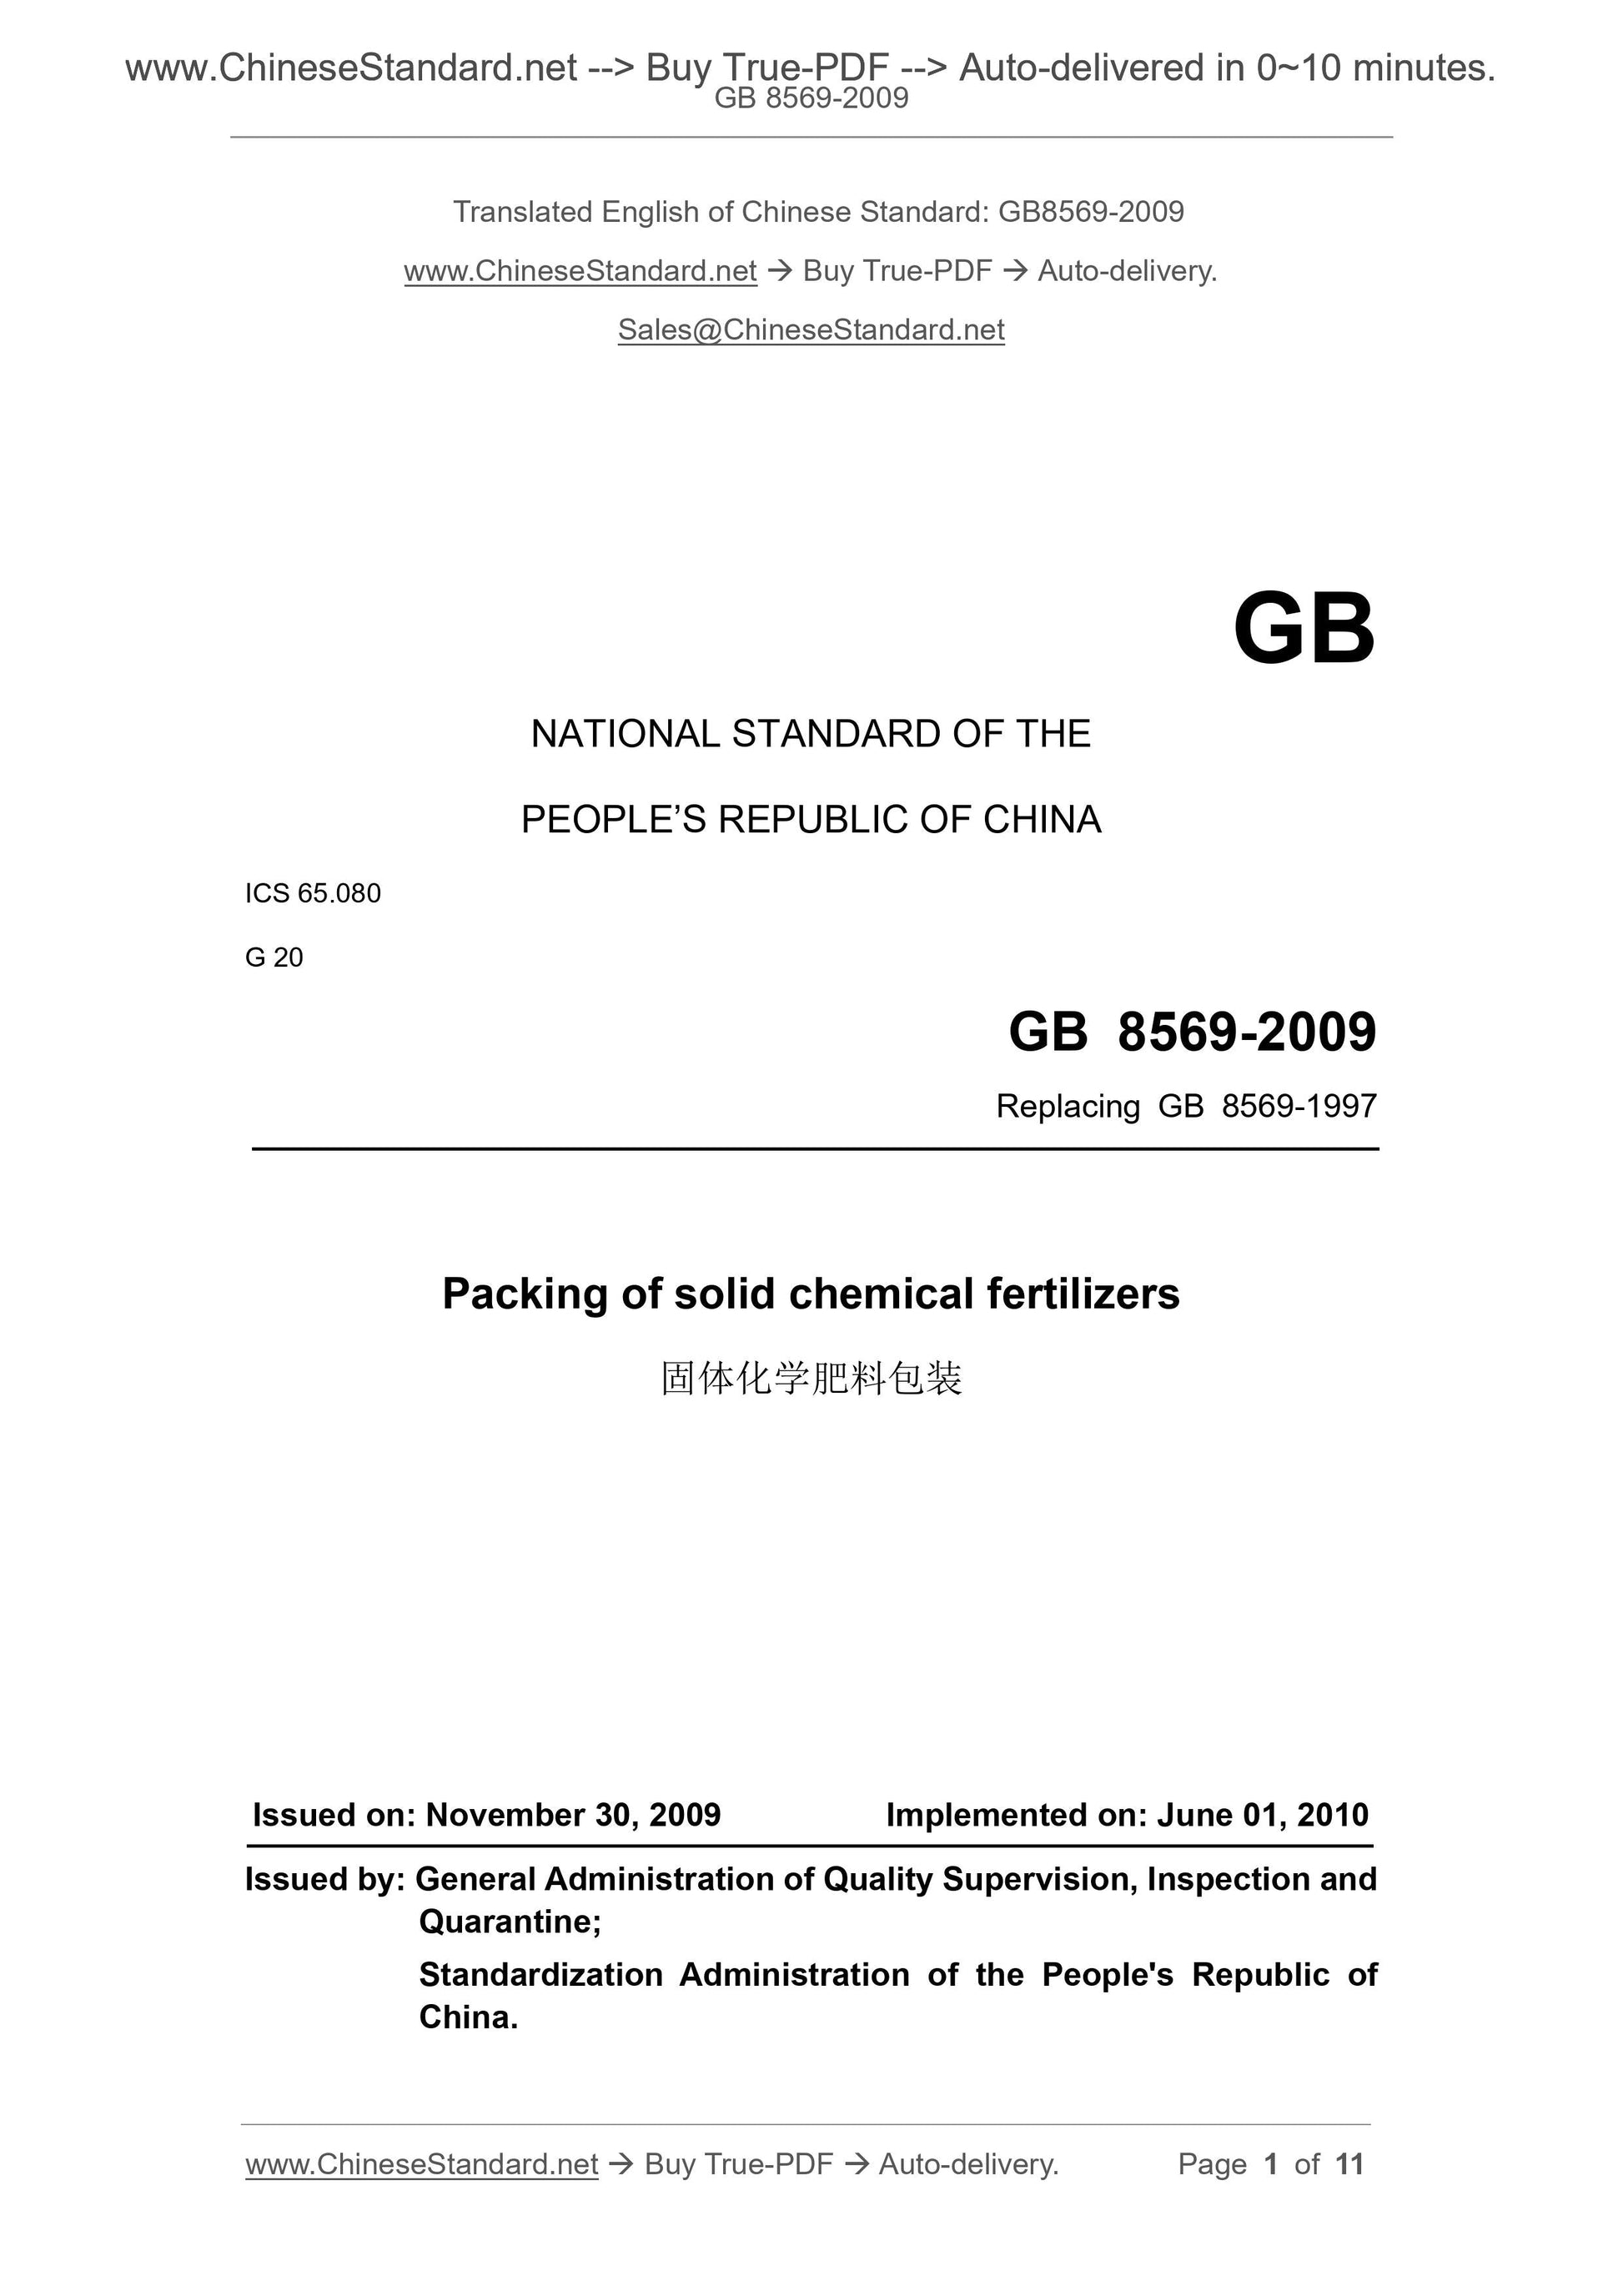 GB 8569-2009 Page 1